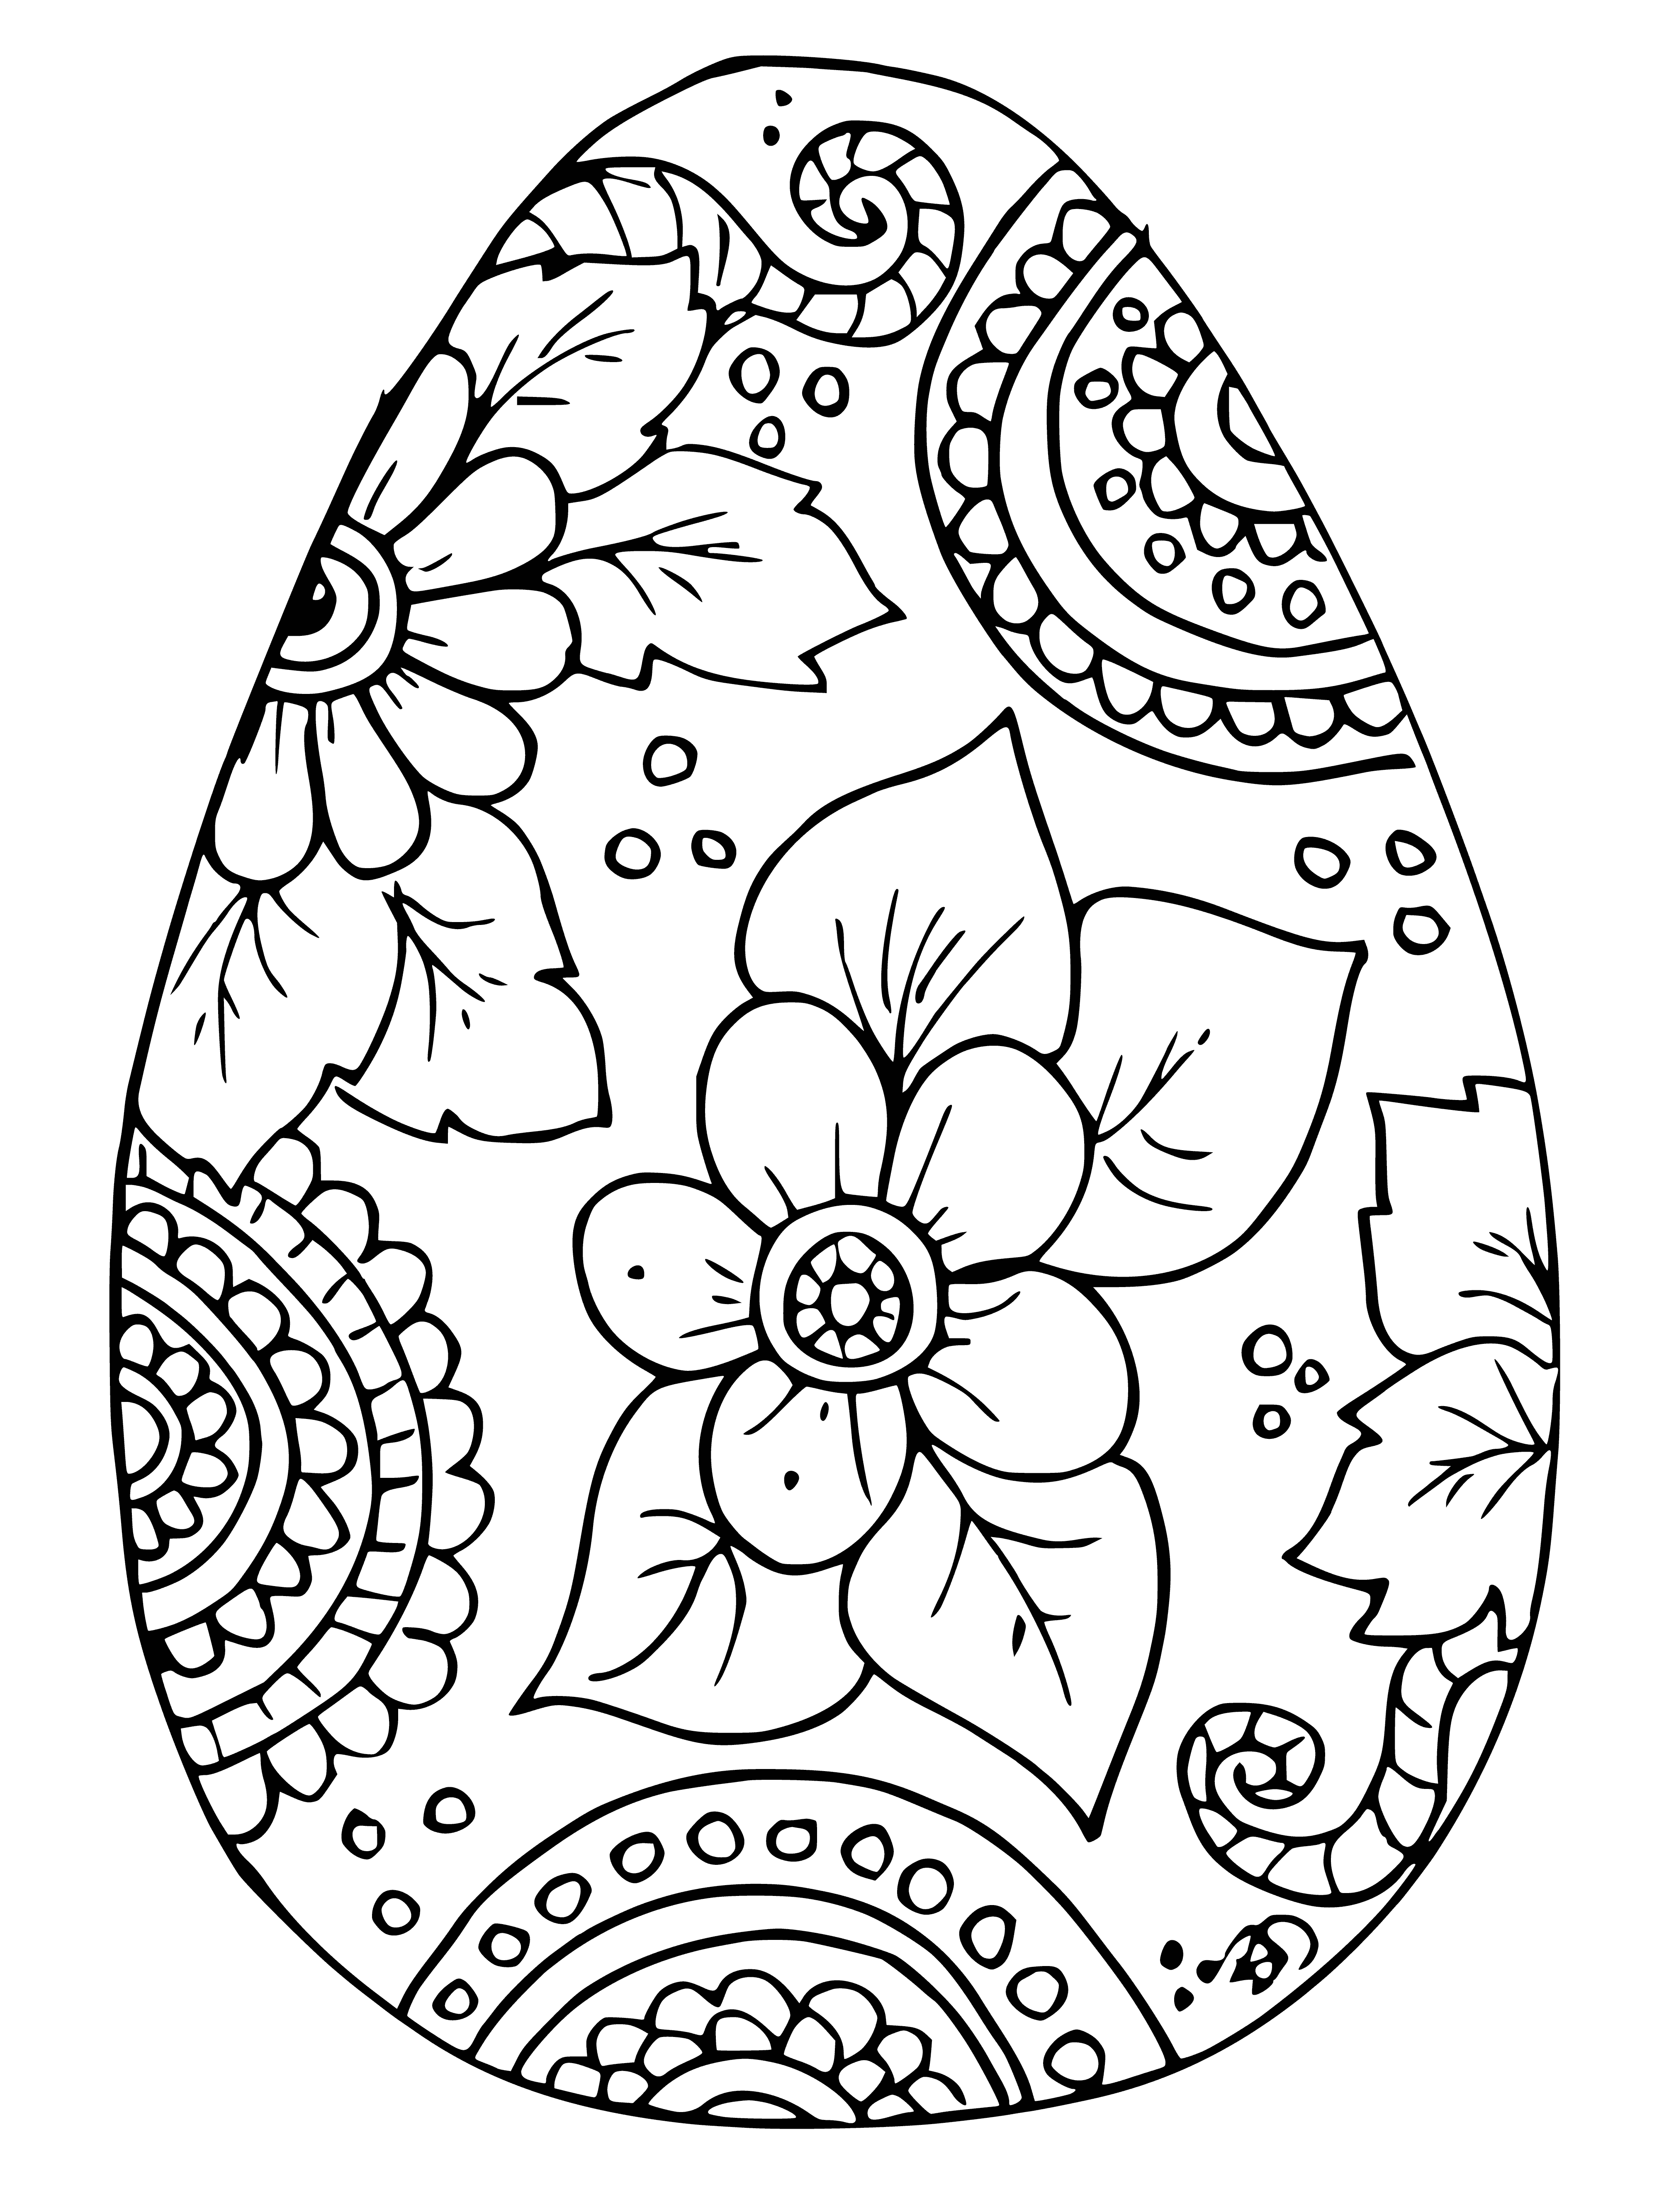 coloring page: 'tBrightly-colored Easter eggs with patterned shells and ribbons tied around some sitting in a basket.